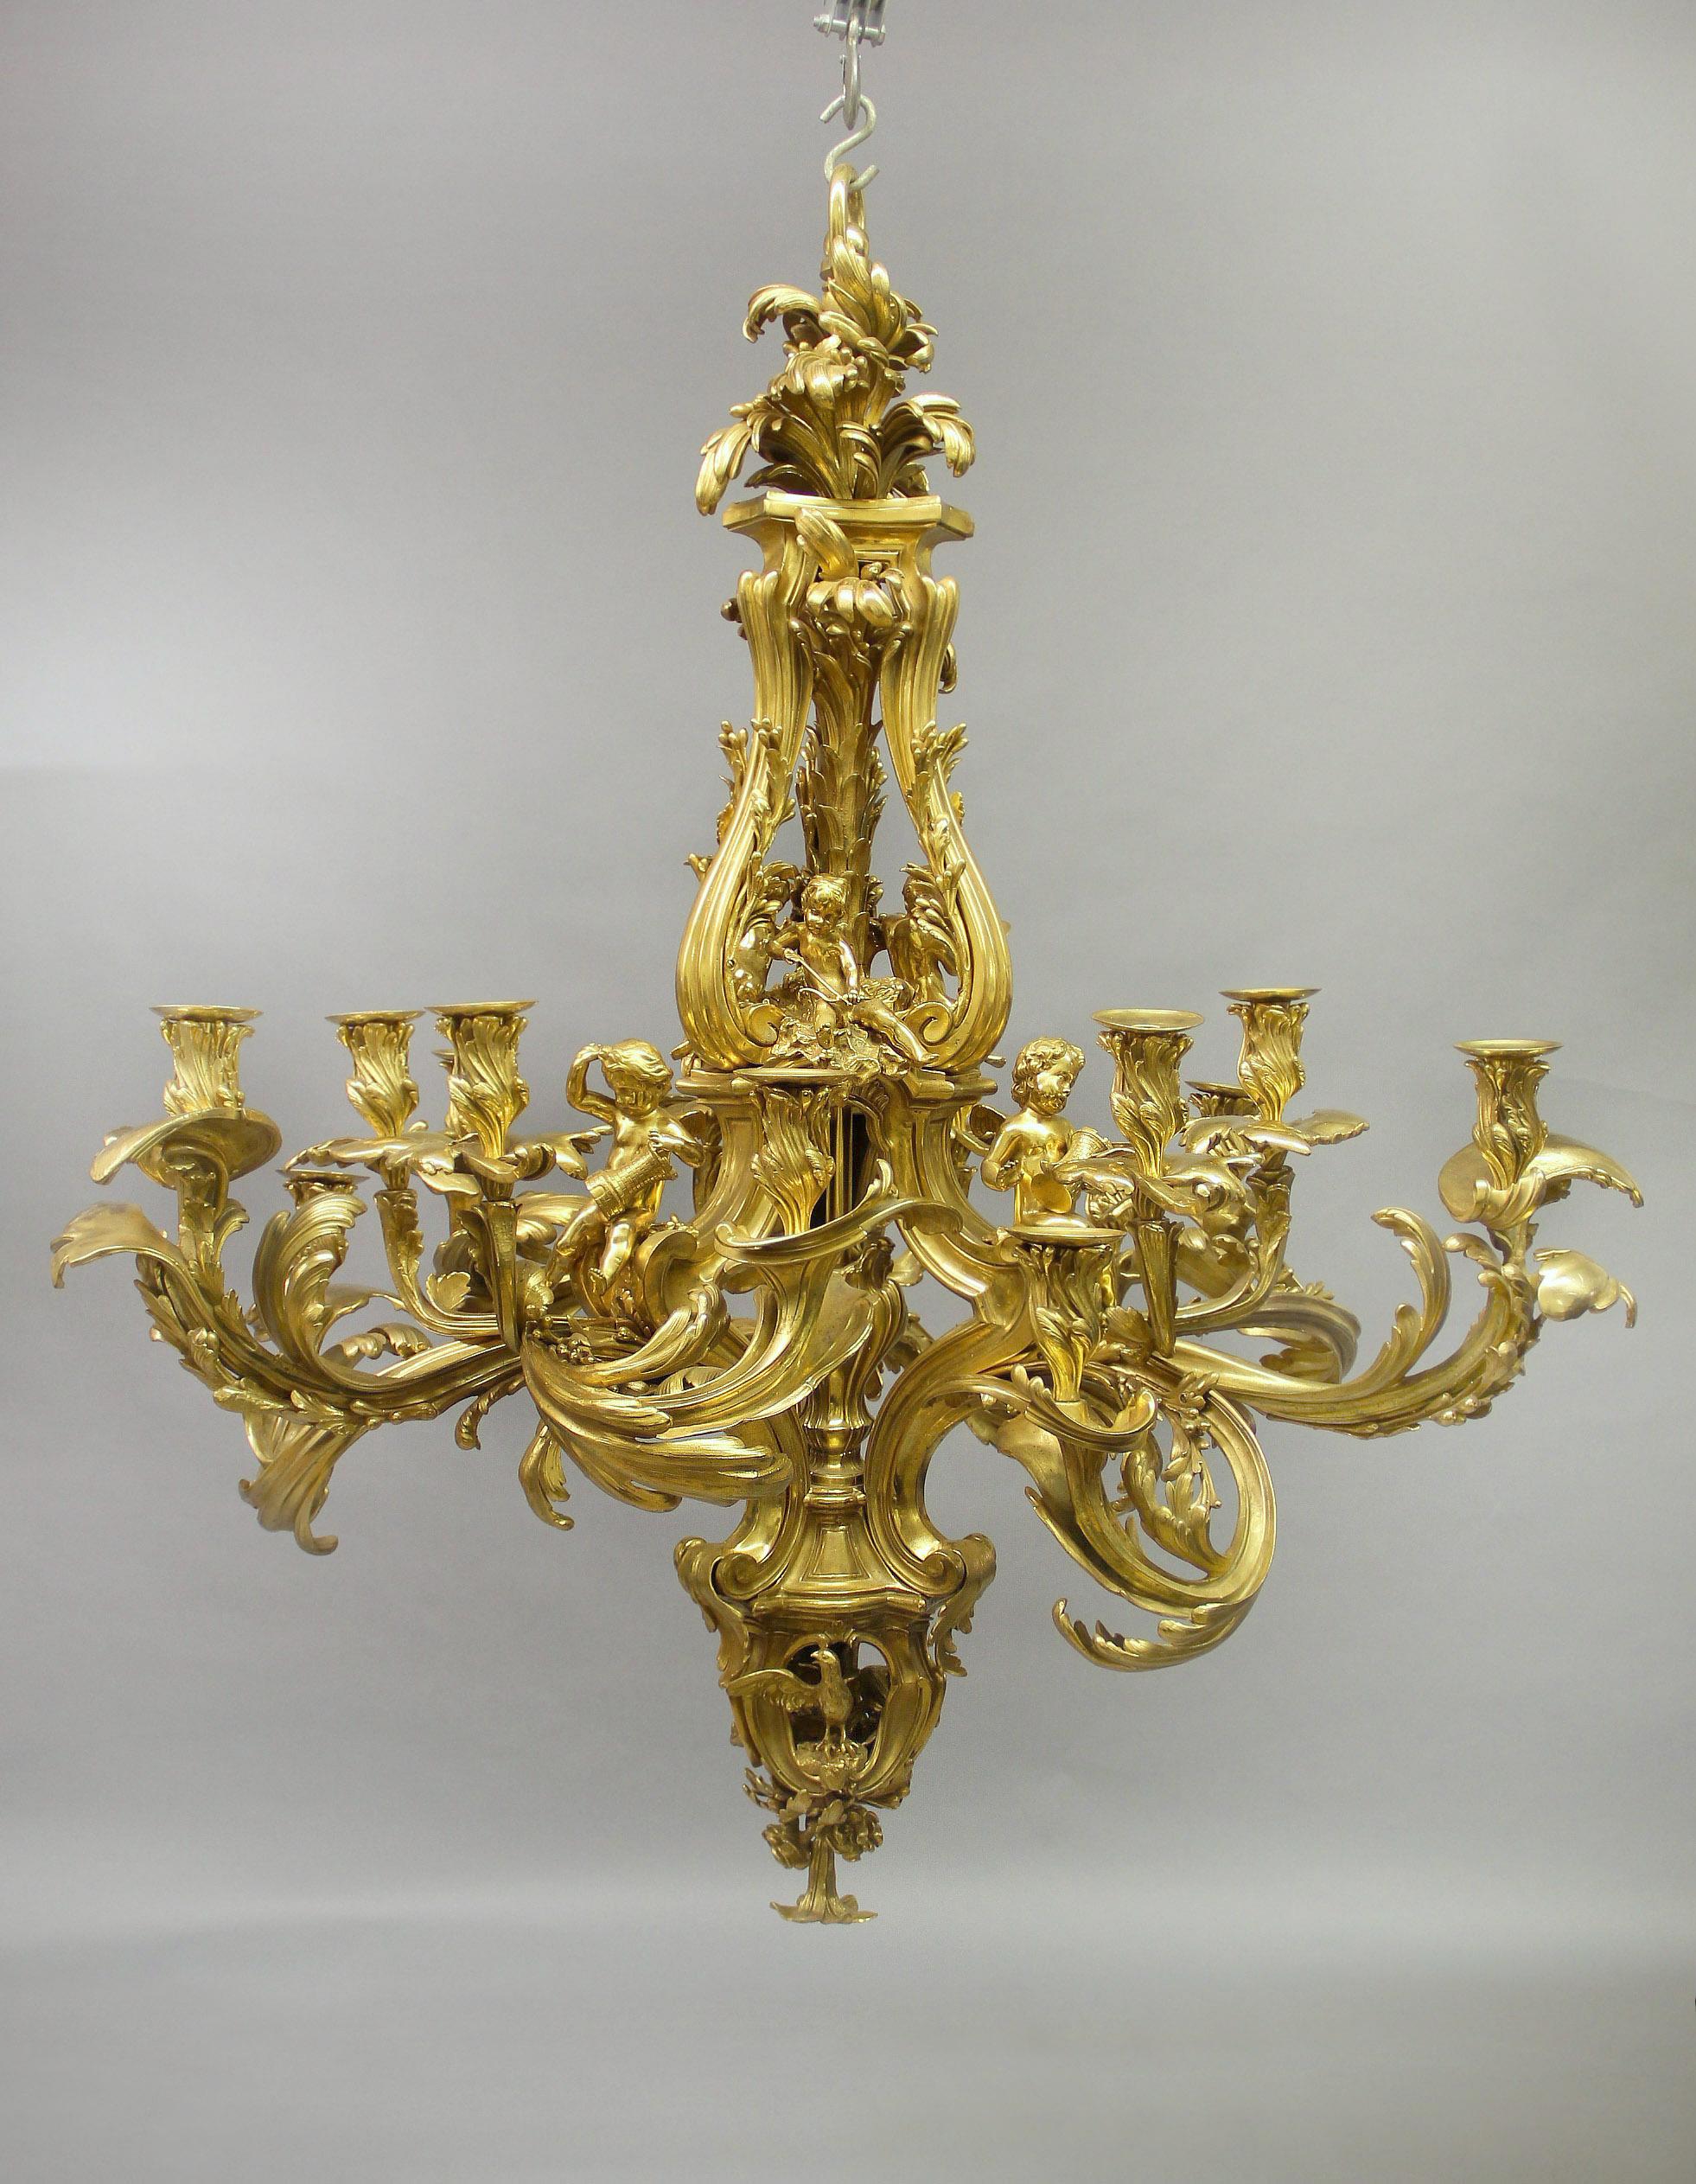 A Magnificent and Palatial late 19th/early 20th century gilt bronze fifteen light chandelier

After the Famous 18th Century Model by Jacques Caffiéri

This wonderful chandelier is centered by a baluster shaped open central stem, surmounted by